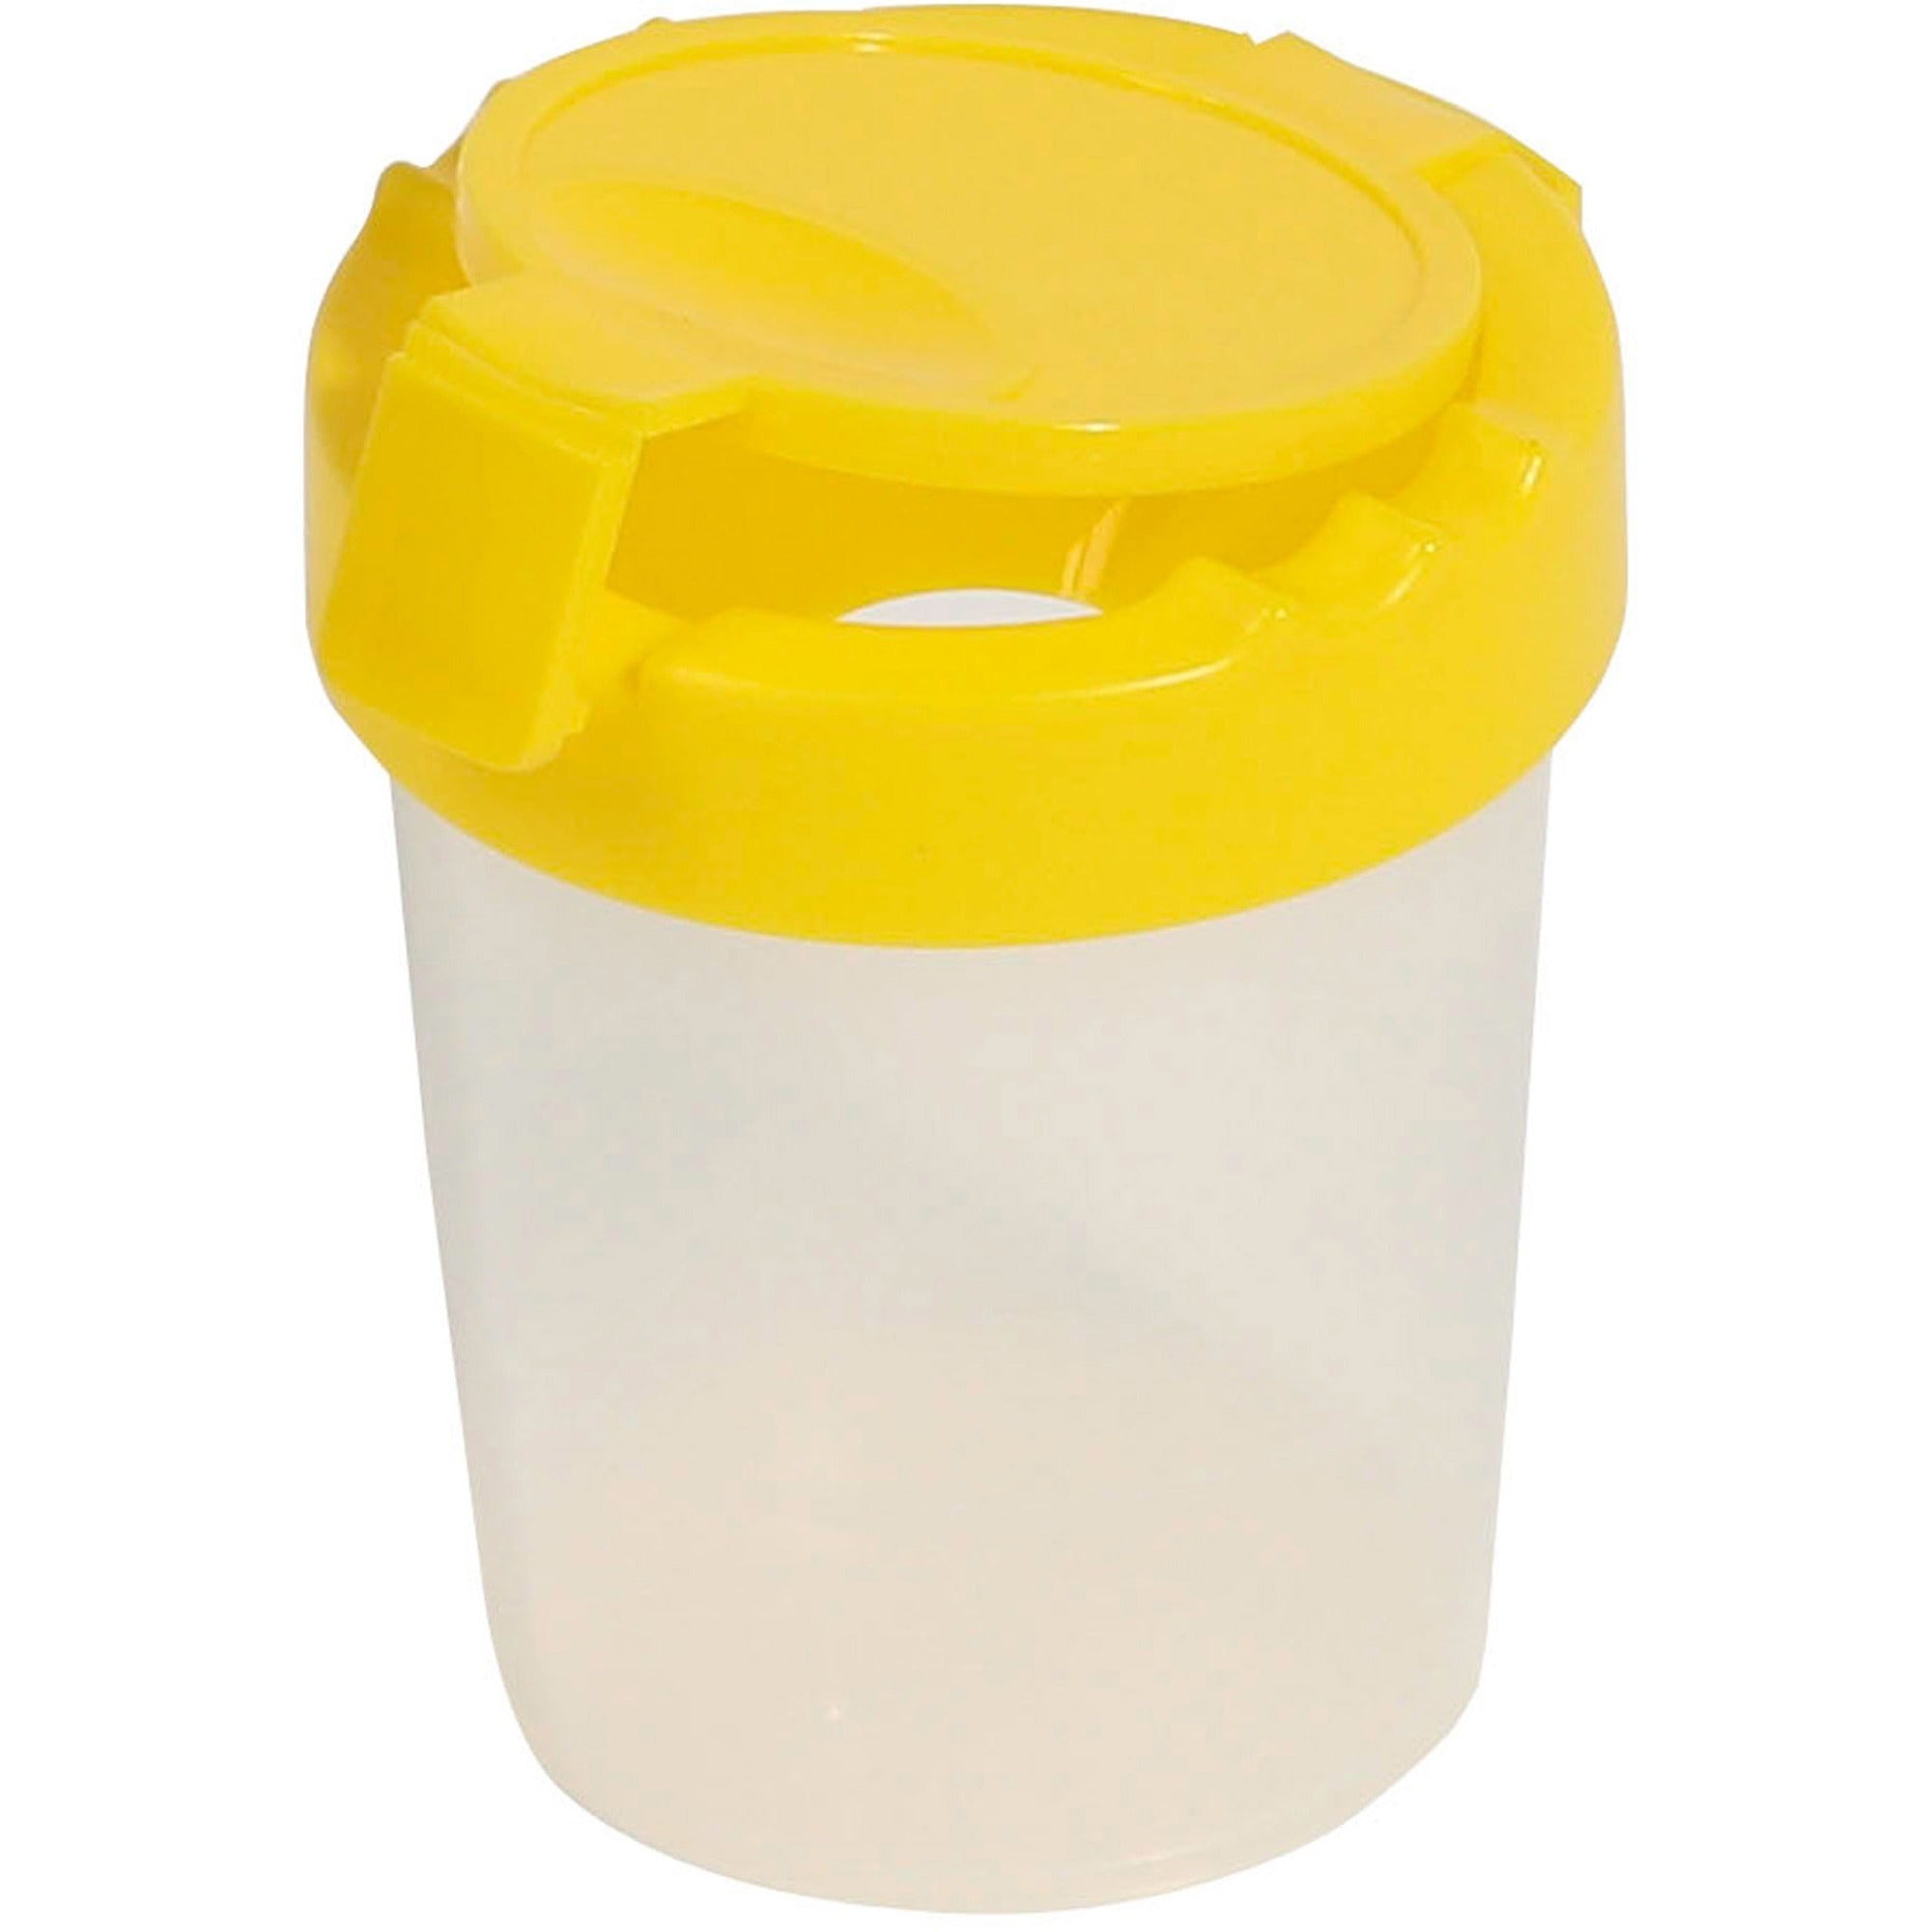 deflecto-antimicrobial-kids-no-spill-paint-cup-yellow-paint-brush-393height-x-346width-x-393depth-1-each-yellow-plastic-polypropylene_def39515yel - 1